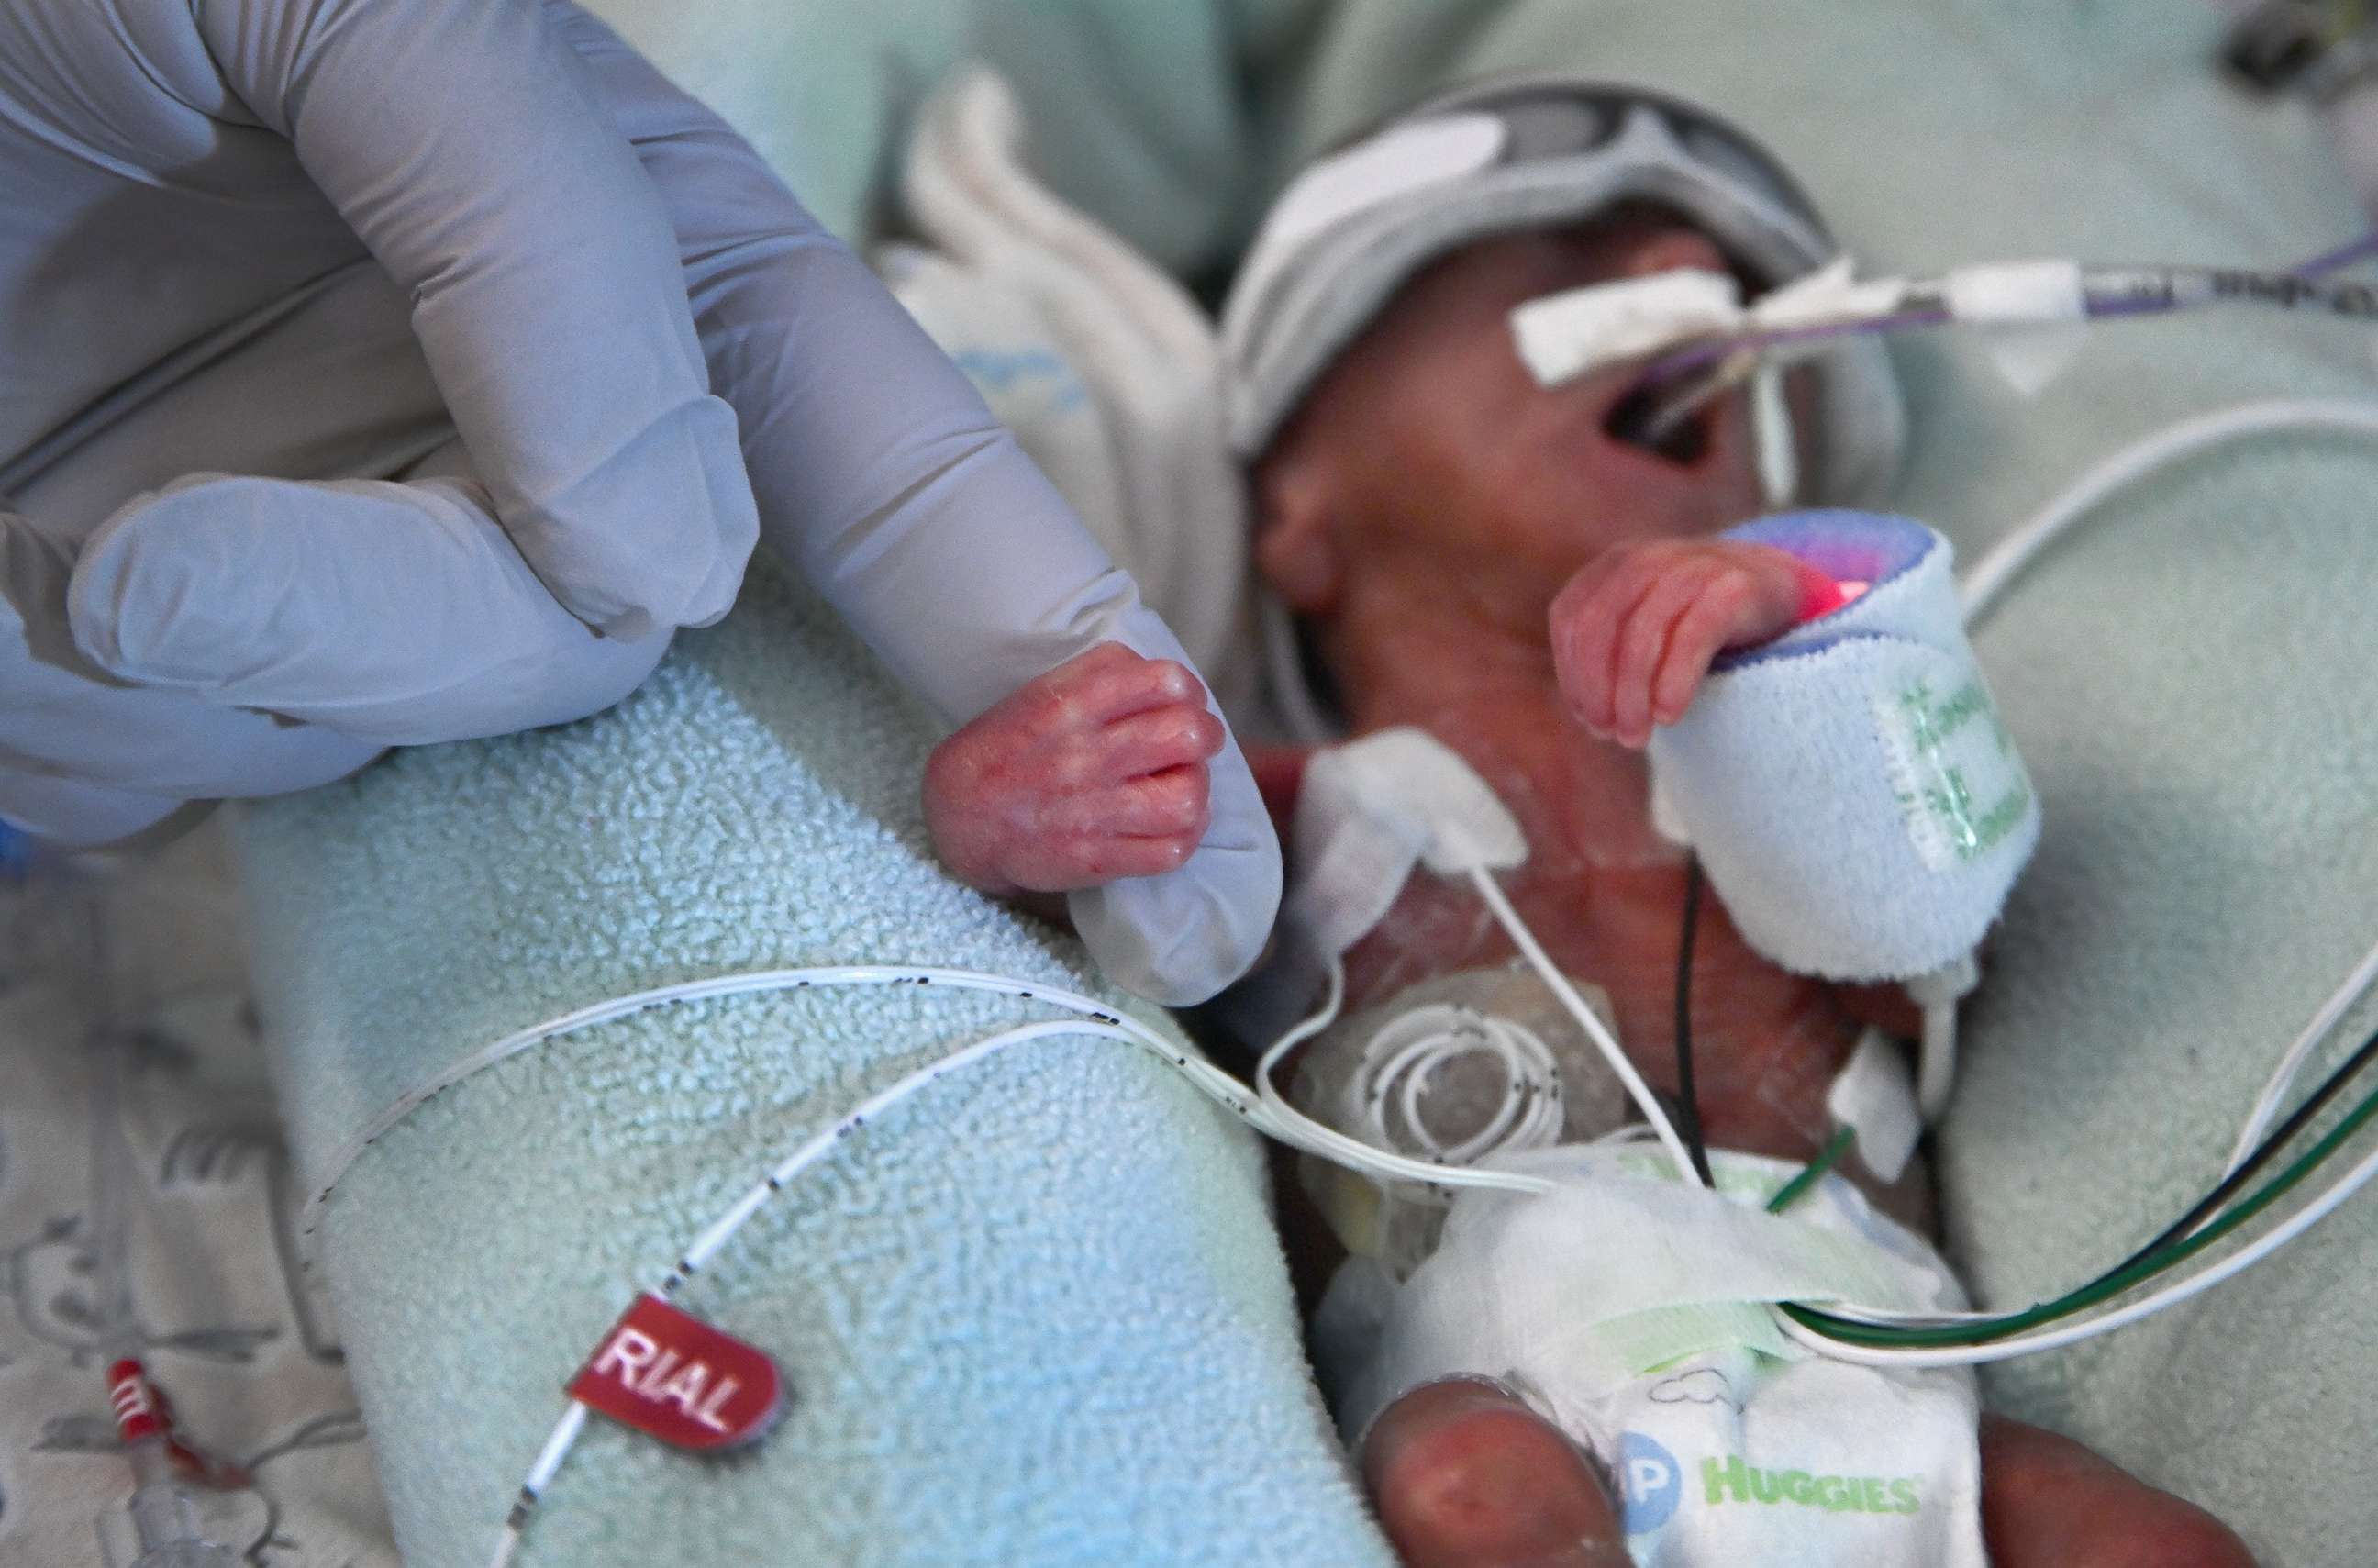 PHOTO: A 2 day old premature baby is cared for in the neonatal intensive care unit of a hospital in Iowa City, Iowa, Aug. 11, 2021.